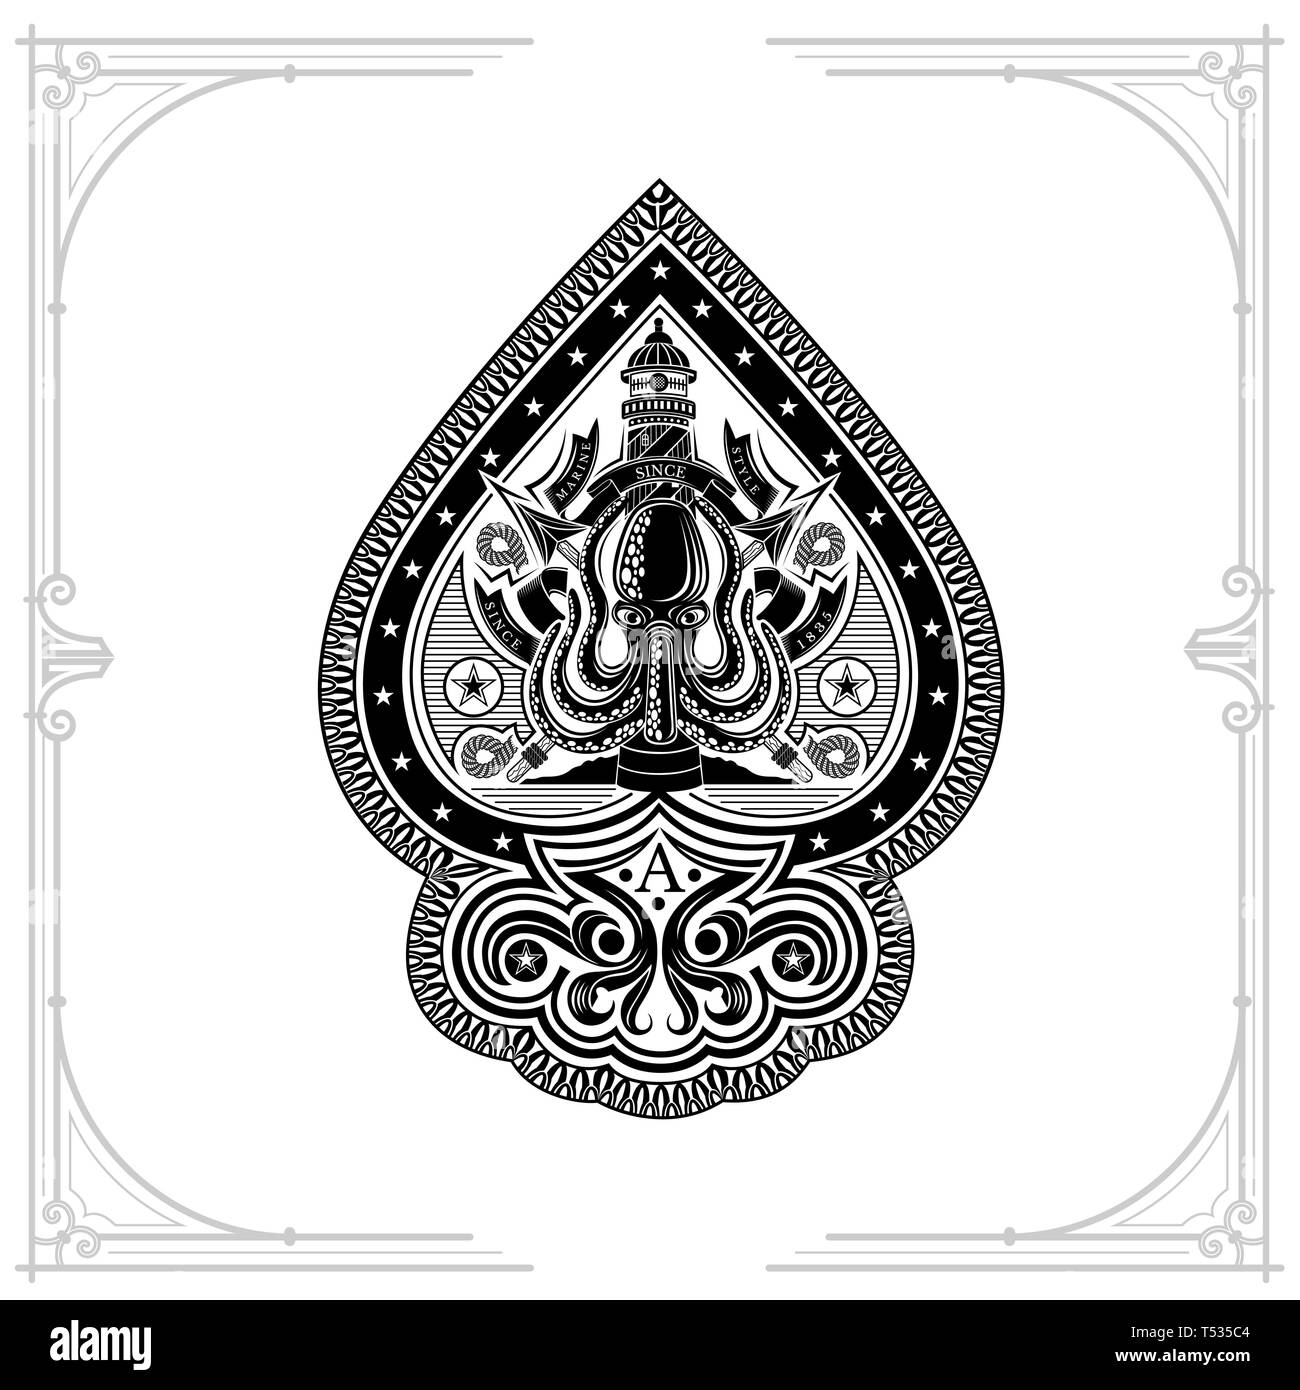 Ace spade brand template logo Stock Vector Images - Alamy